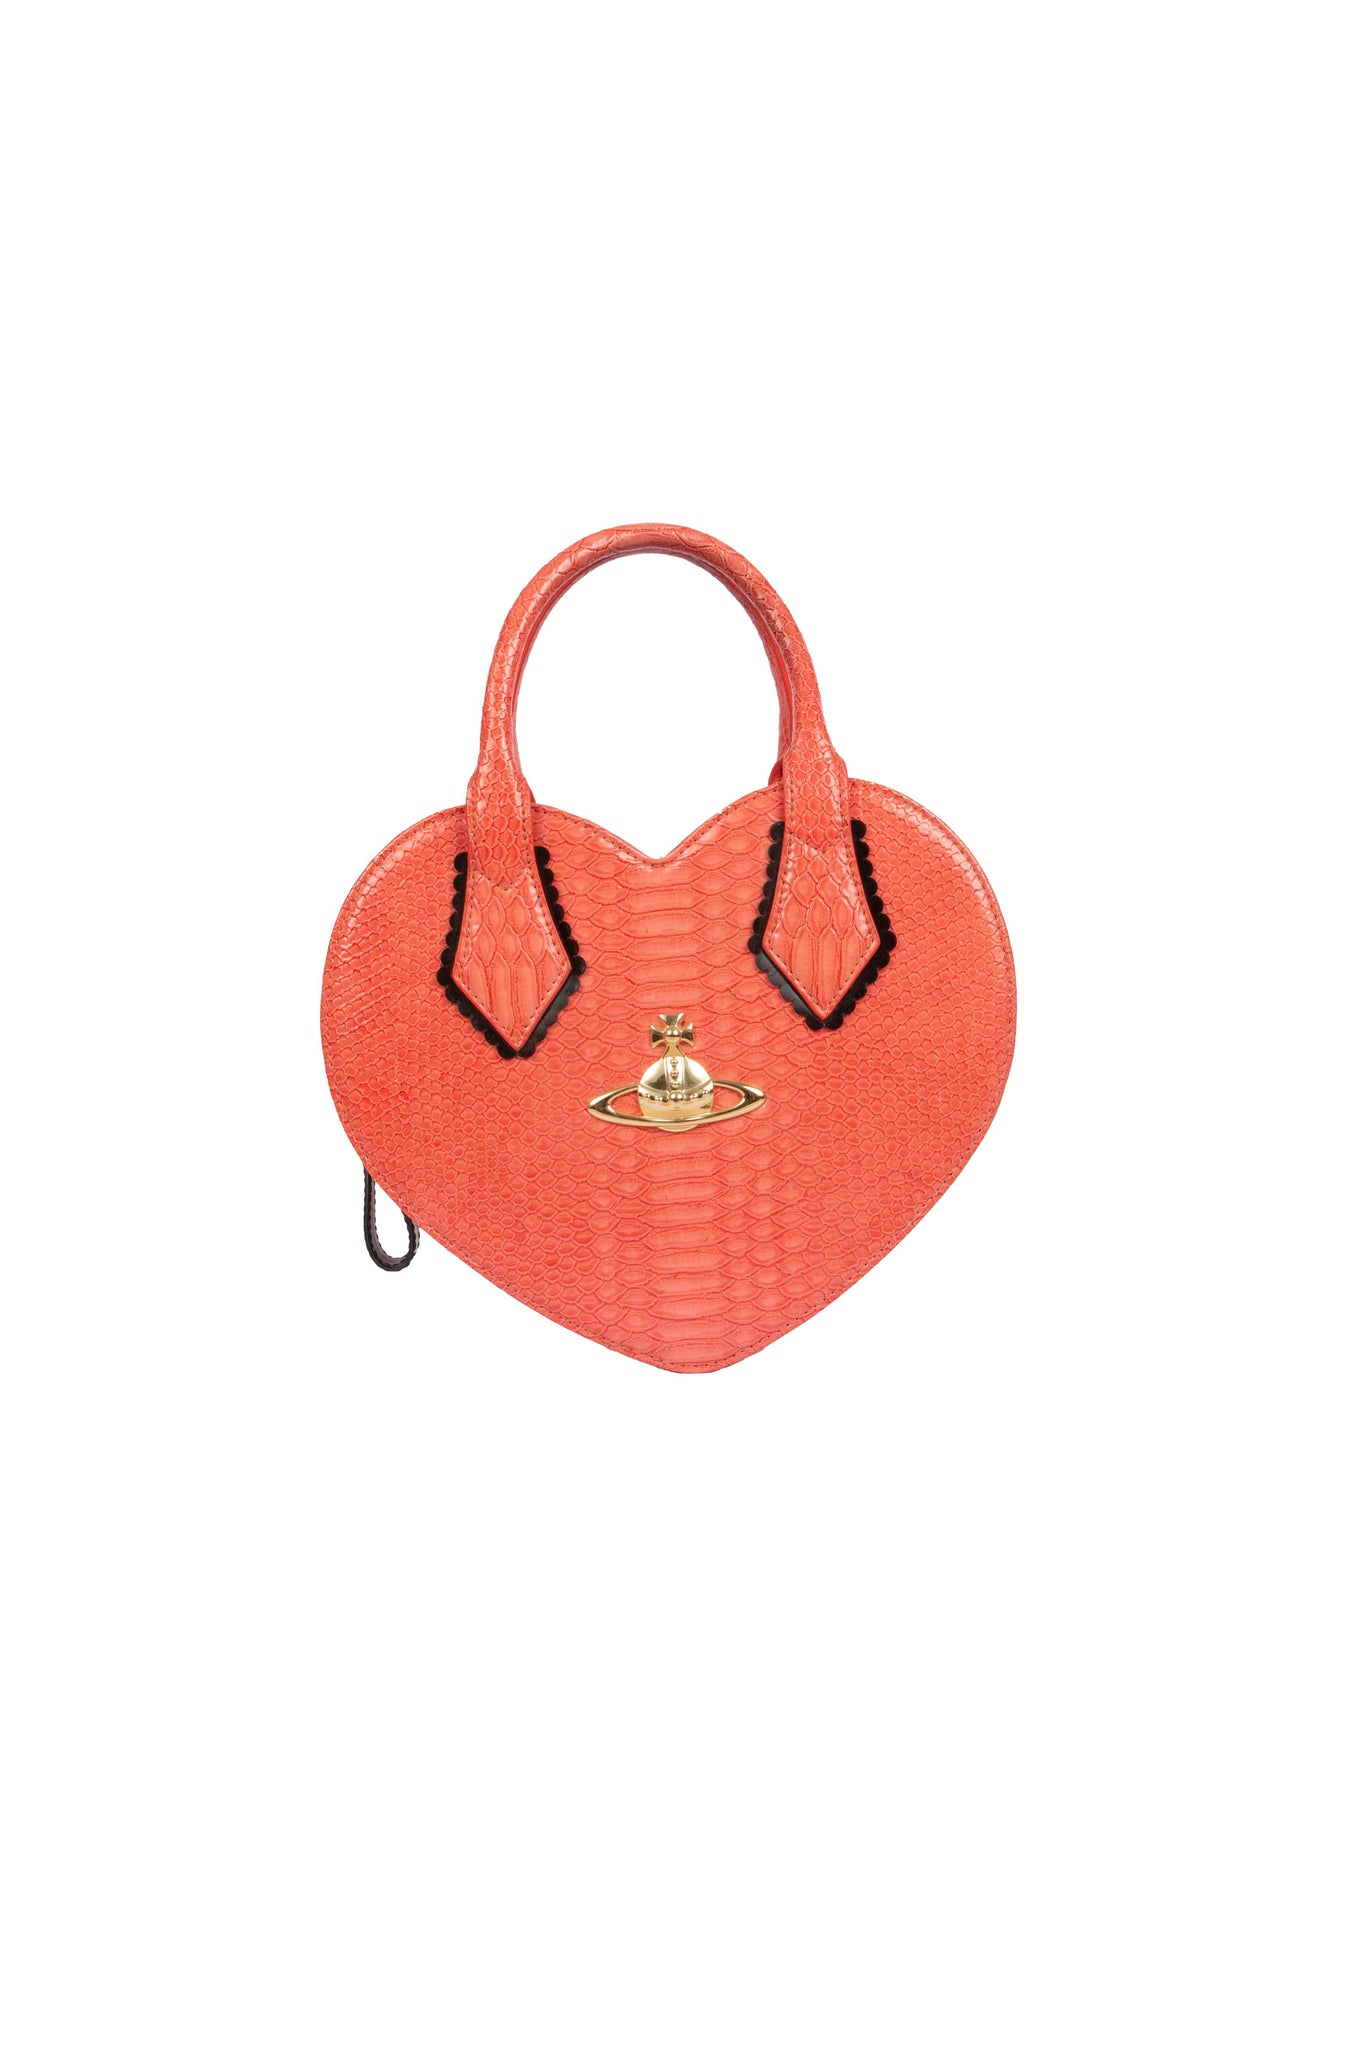 Vivienne Westwood New Chancery Heart Bag in Pink